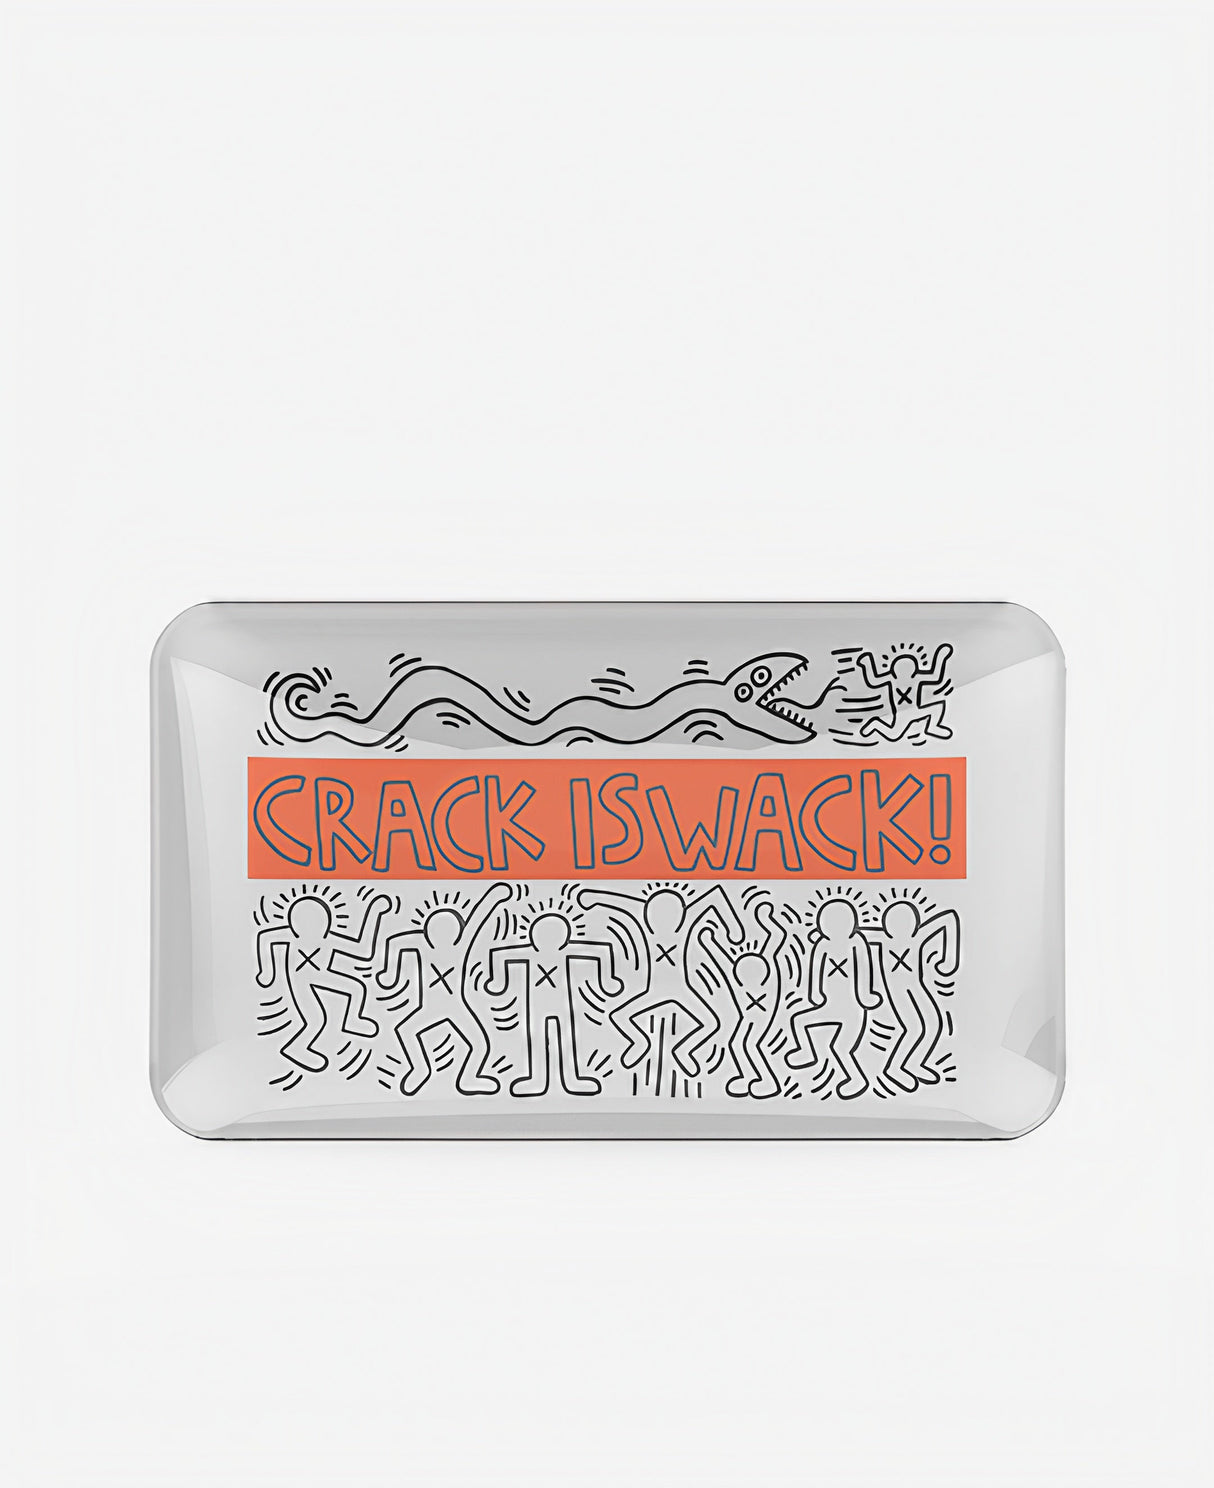 K.Haring Glass Collection rolling tray with bold artwork, top view on white background